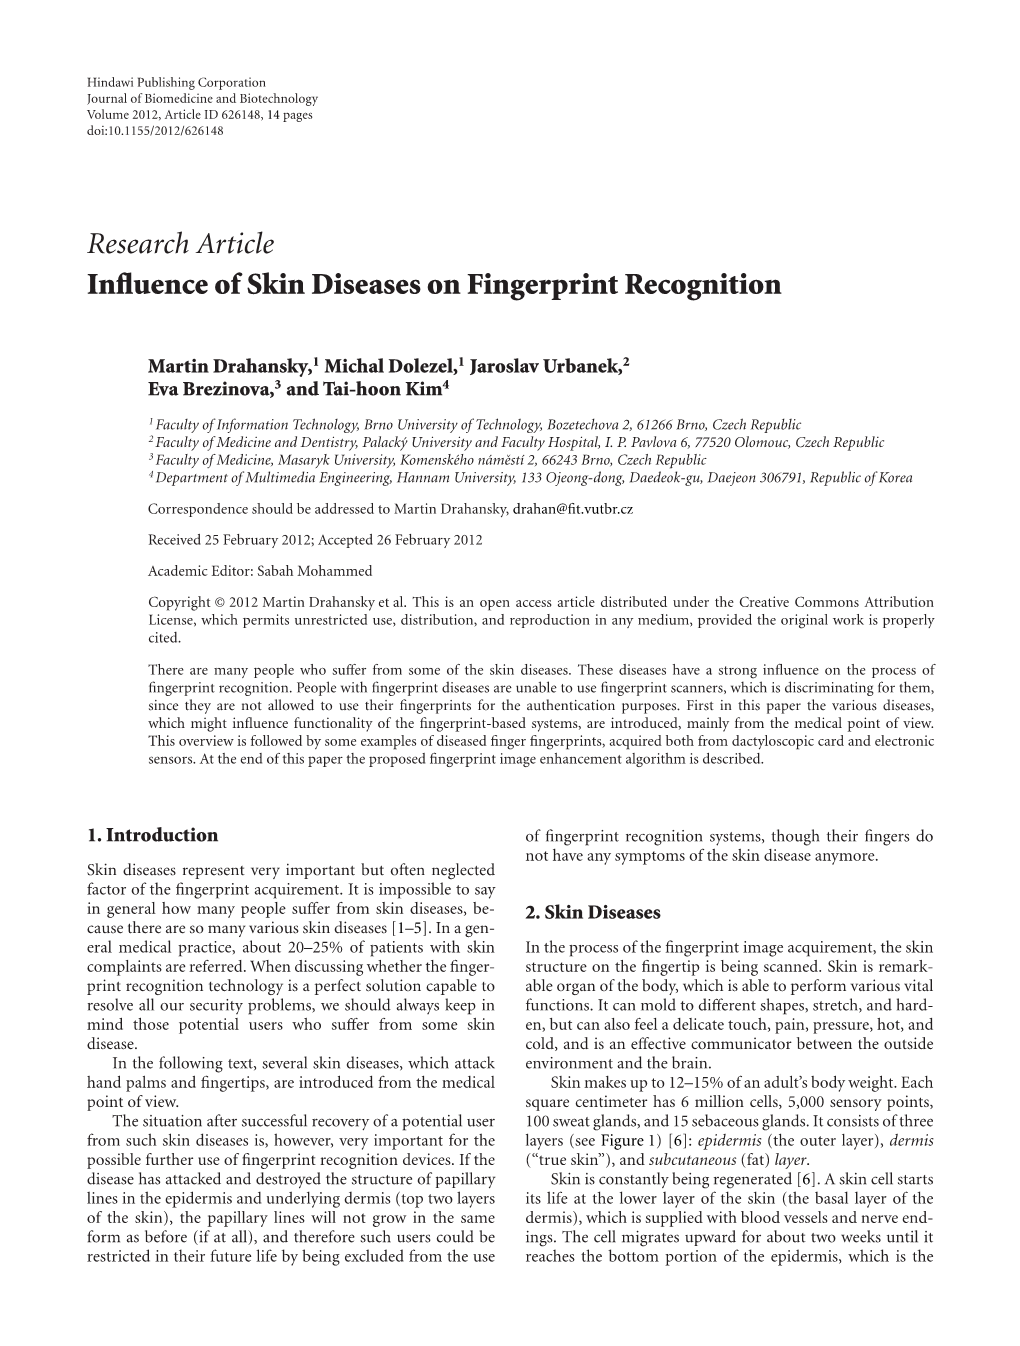 Research Article Influence of Skin Diseases on Fingerprint Recognition